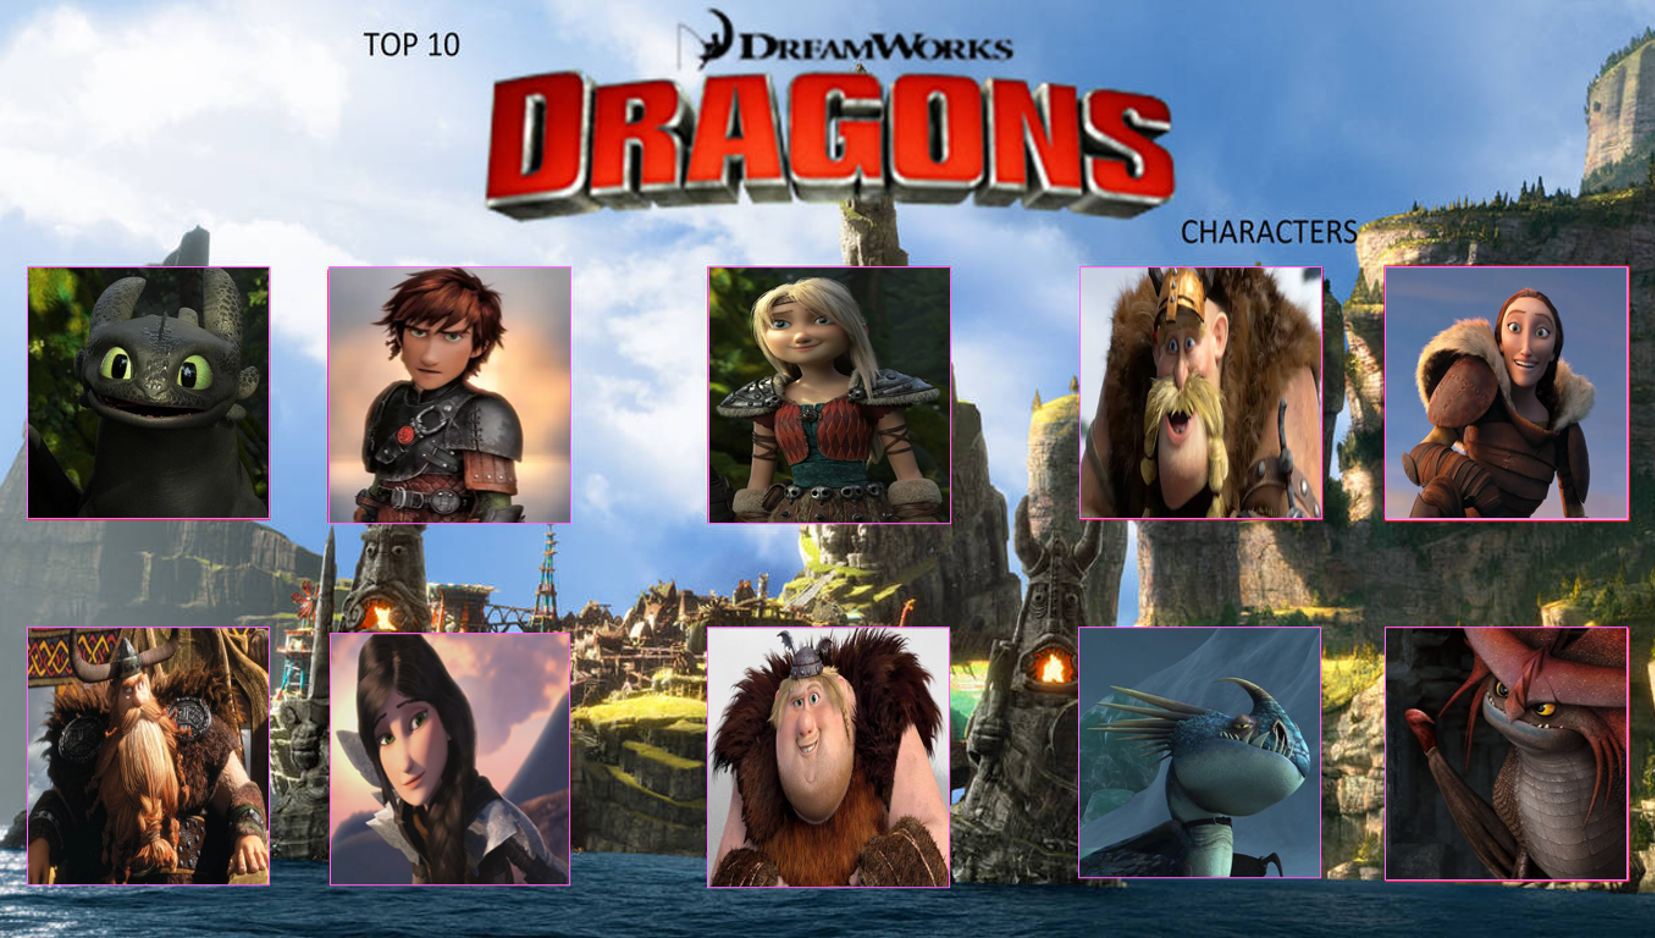 Dragons: Race to the Edge': First Look at Dragon Rider Character